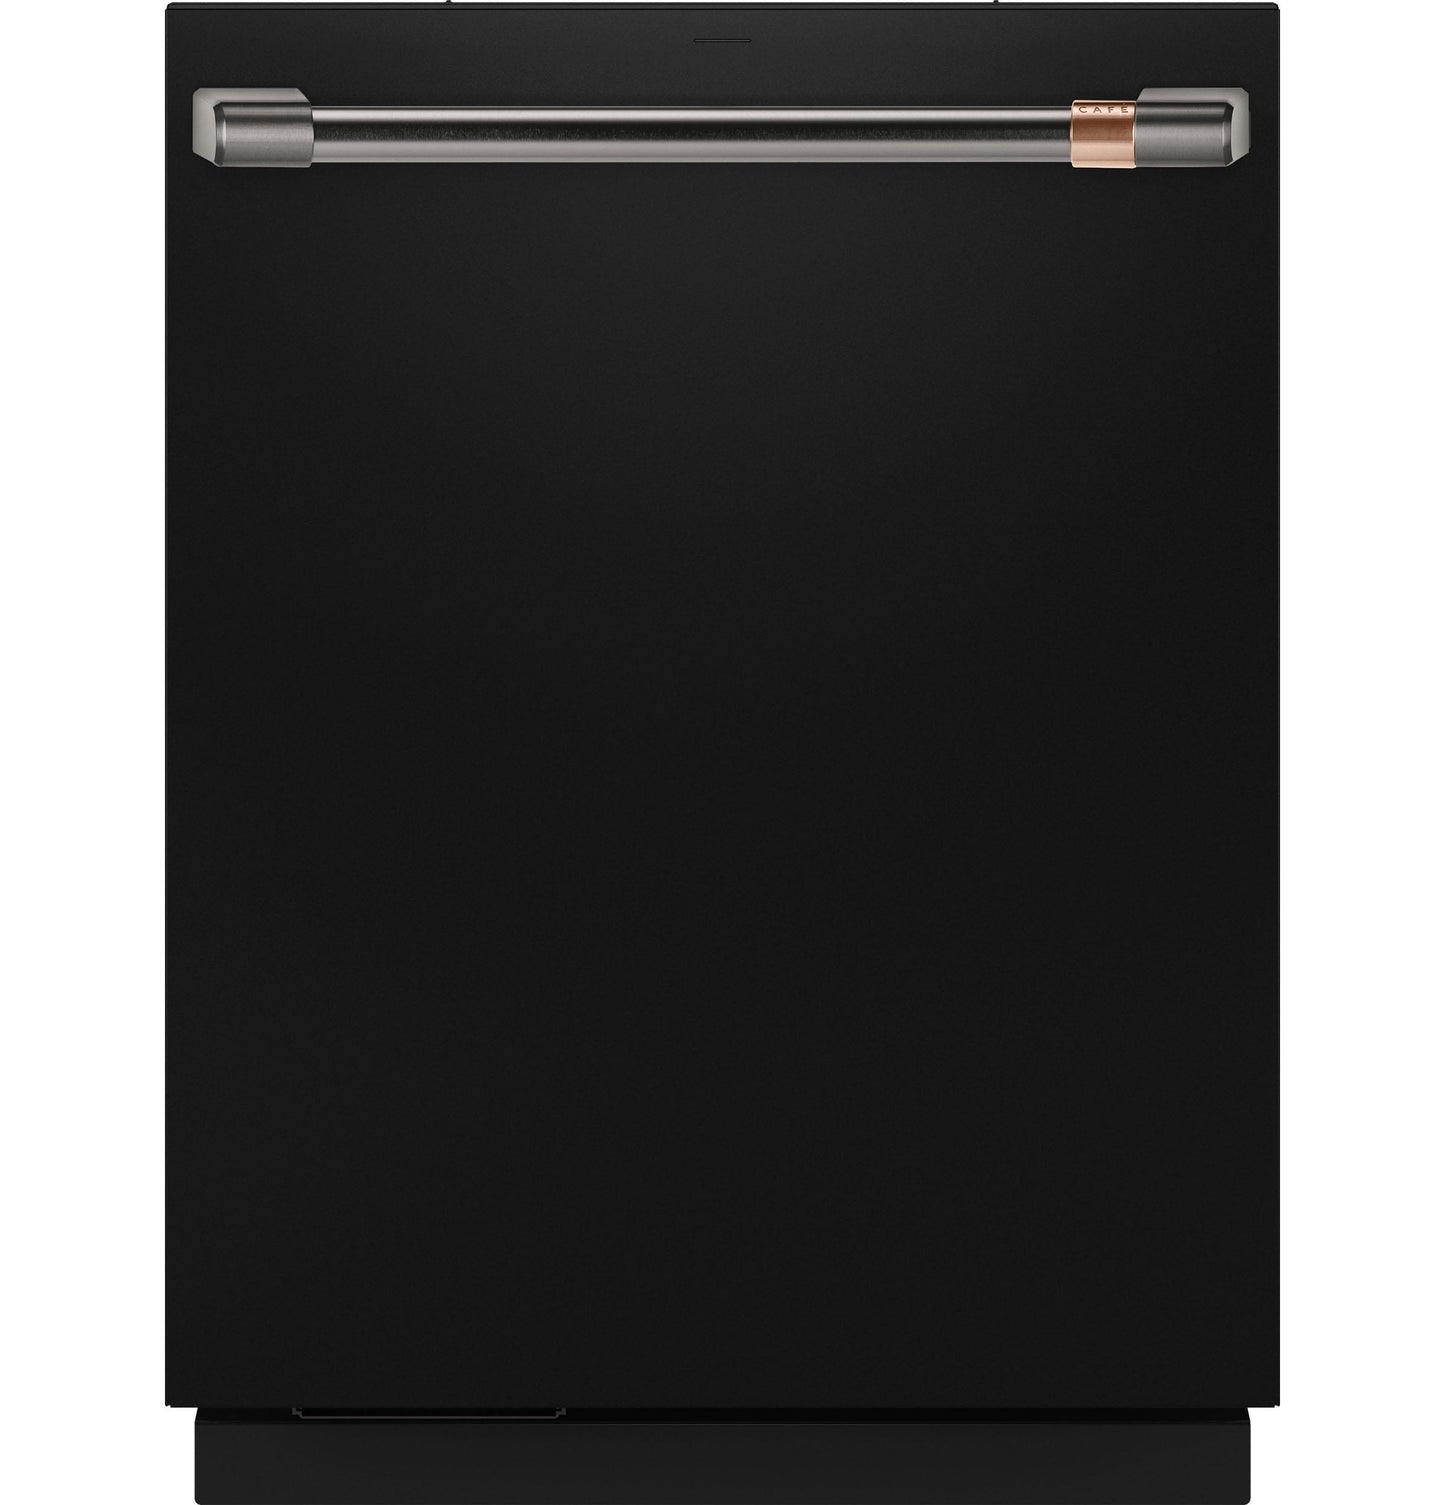 Cafe CDT858P3VD1 Café&#8482; Customfit Energy Star Stainless Interior Smart Dishwasher With Ultra Wash Top Rack And Dual Convection Ultra Dry, 44 Dba